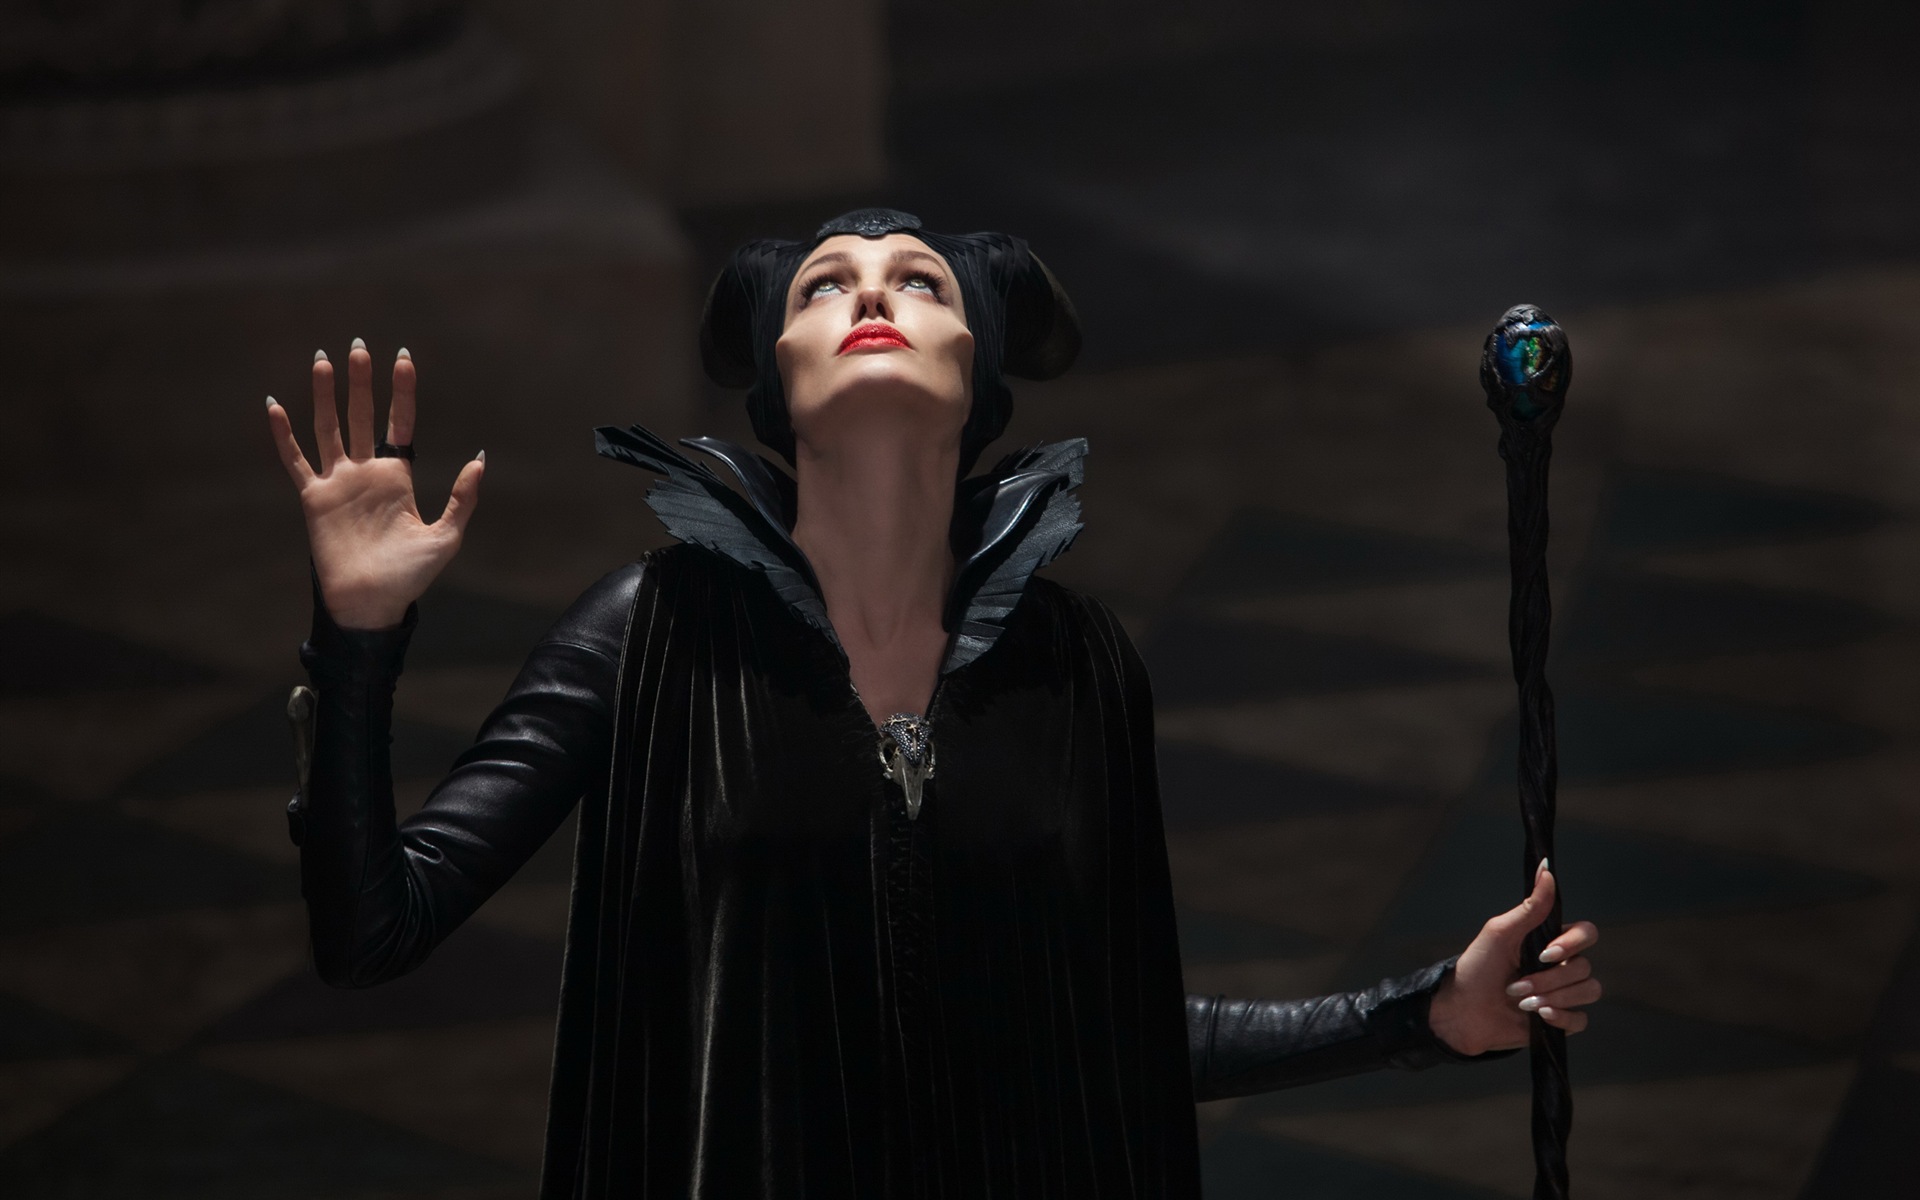 Maleficent 2014 HD movie wallpapers #4 - 1920x1200